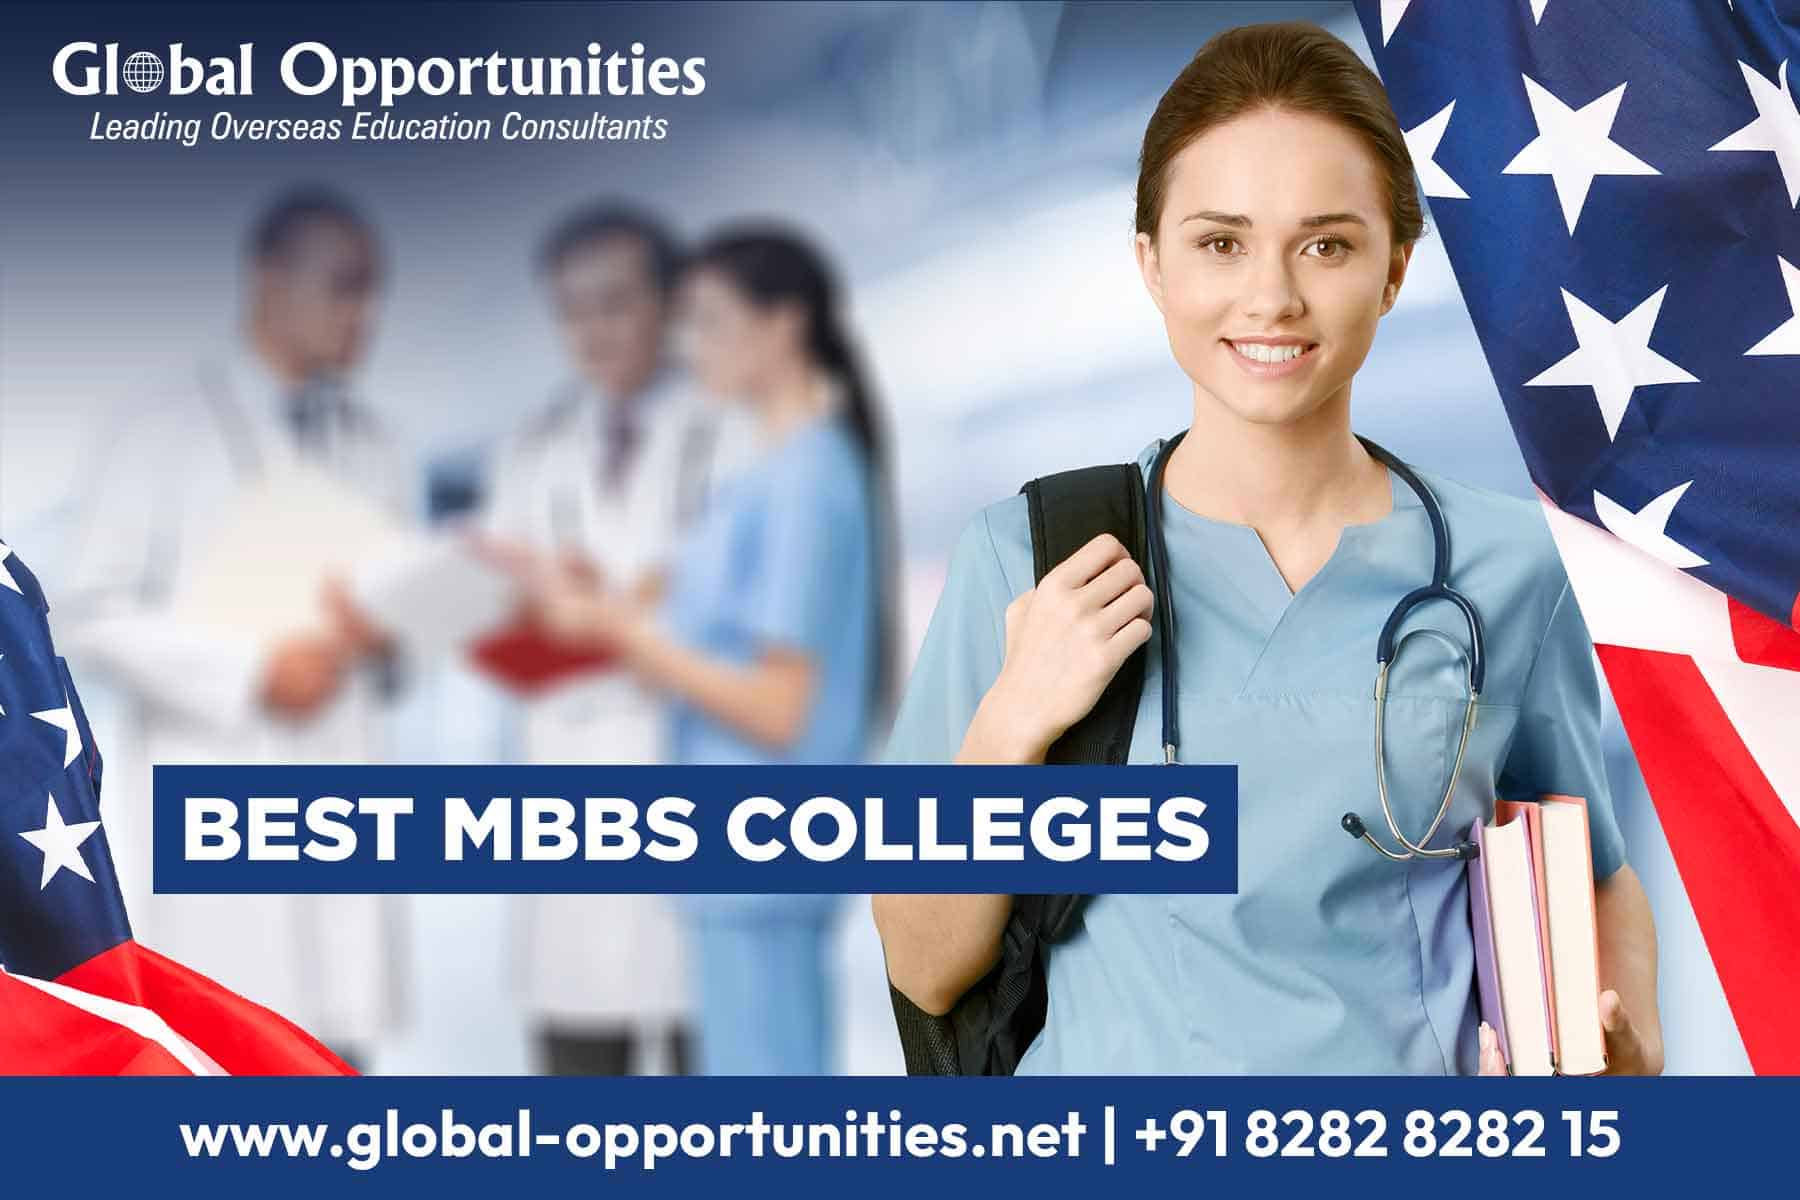 Best MBBS Colleges in the USA